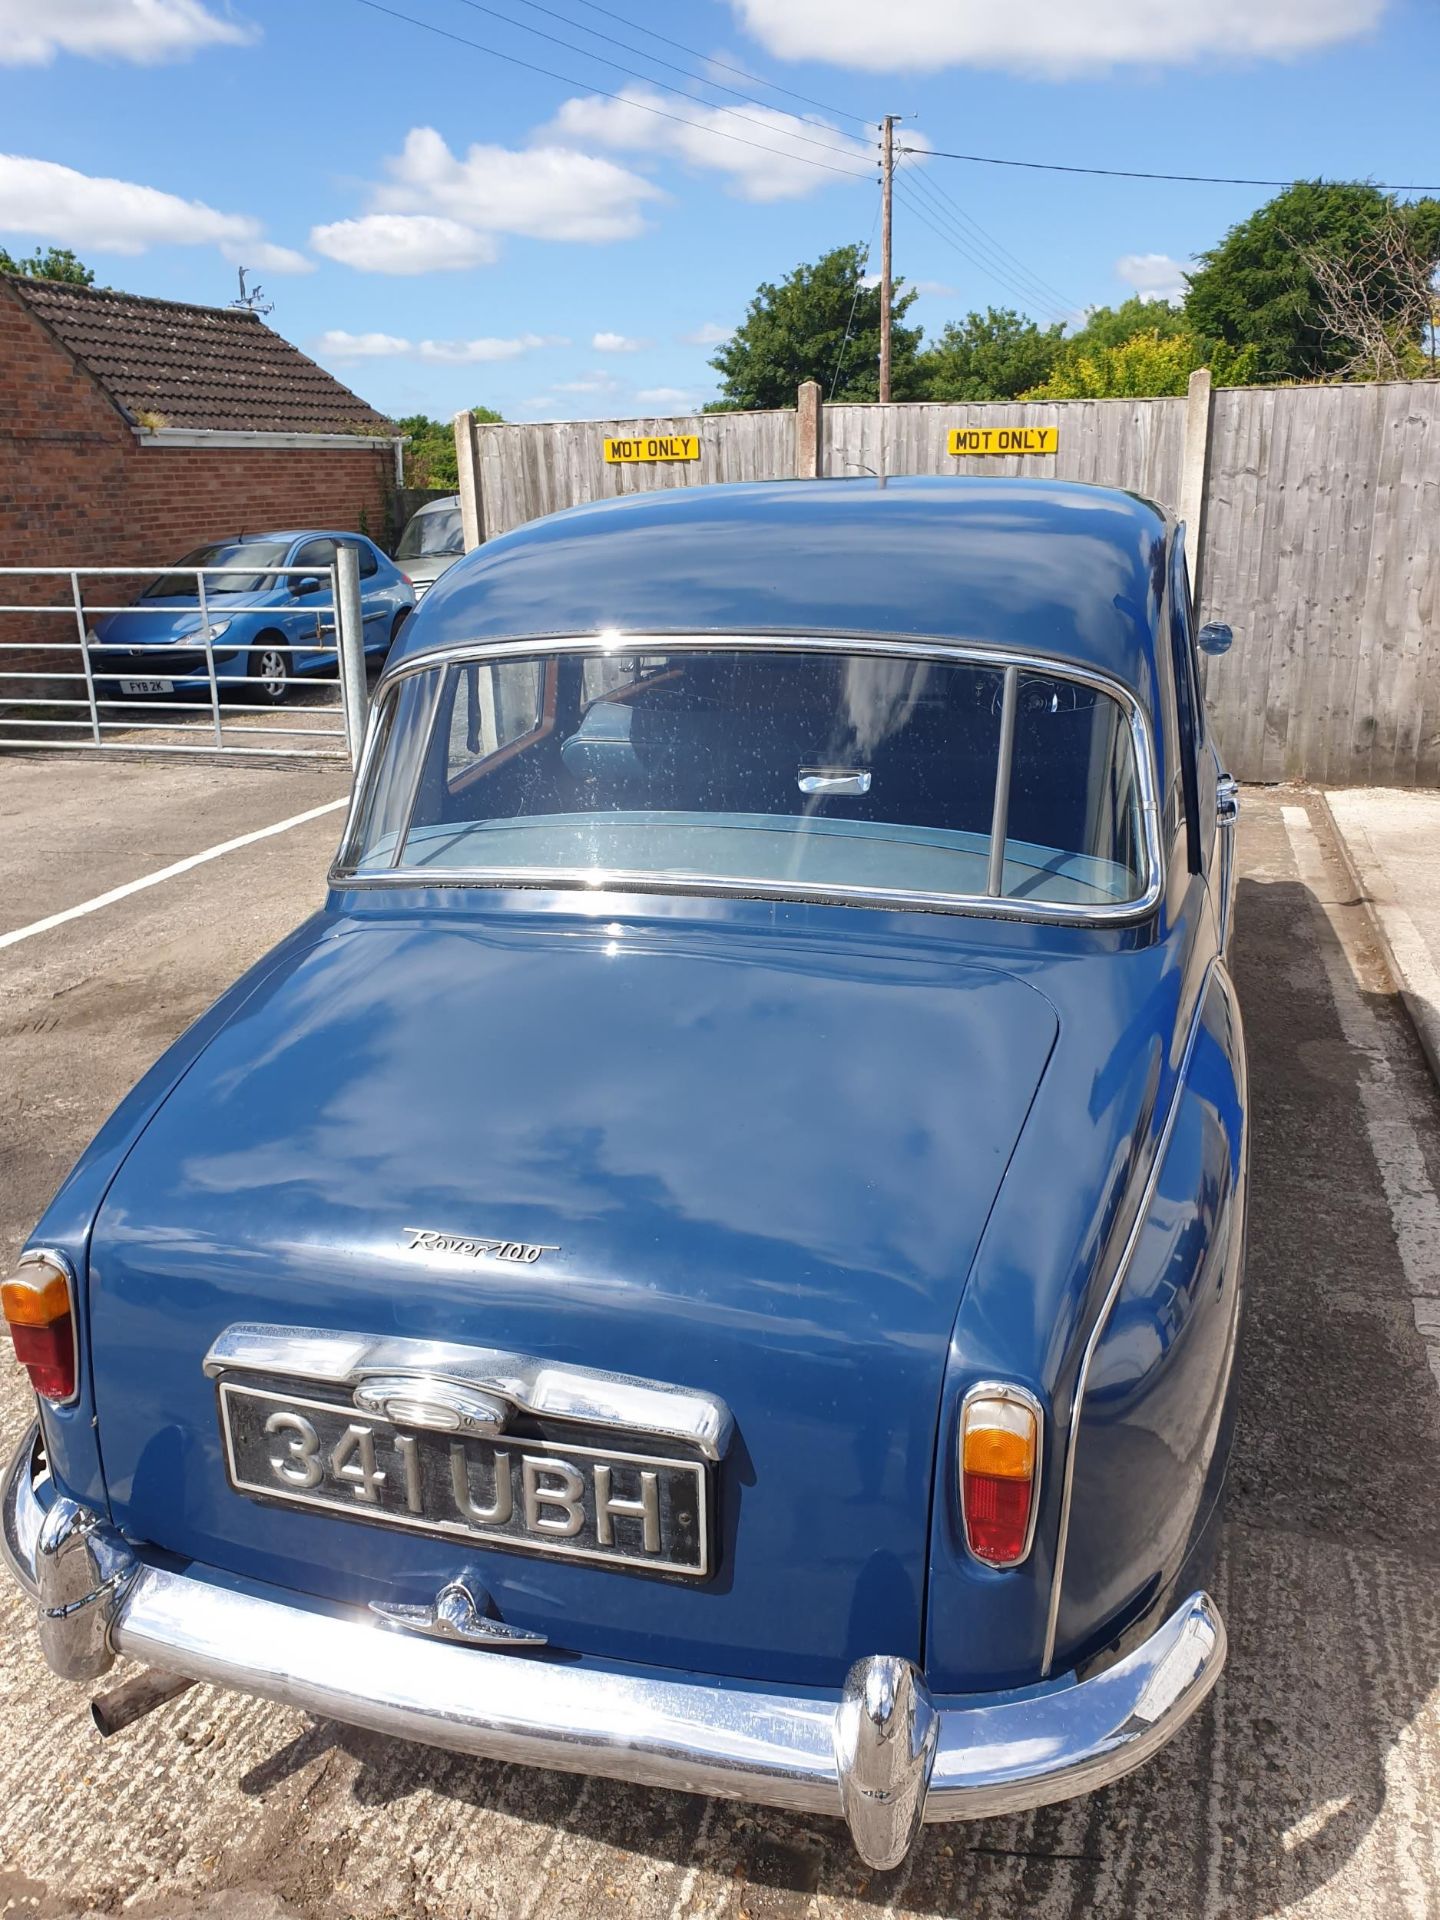 1961 Rover 100 P4 Registration number 341 UBH Blue with blue leather interior The clutch and gearbox - Image 11 of 11